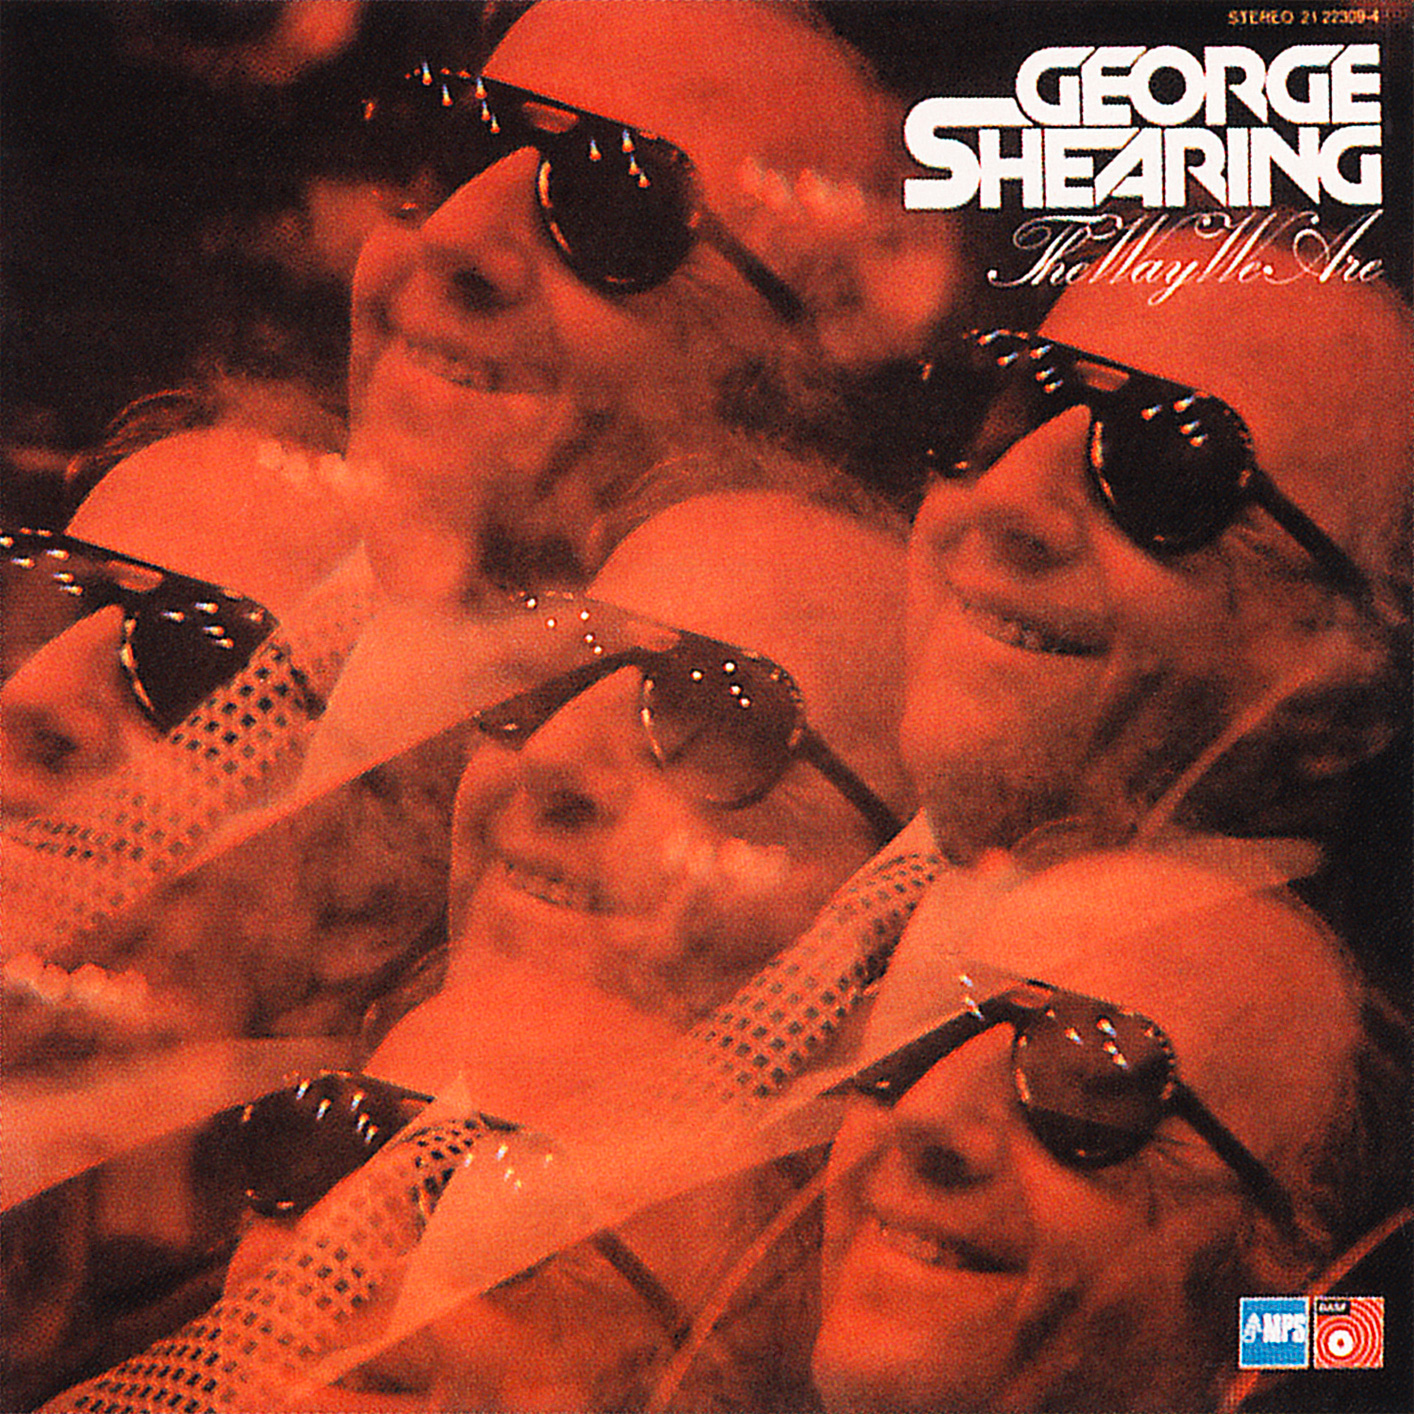 The George Shearing Quintet & Amigos - The Way We Are (1974/2014) [HighResAudio FLAC 24bit/88,2kHz]